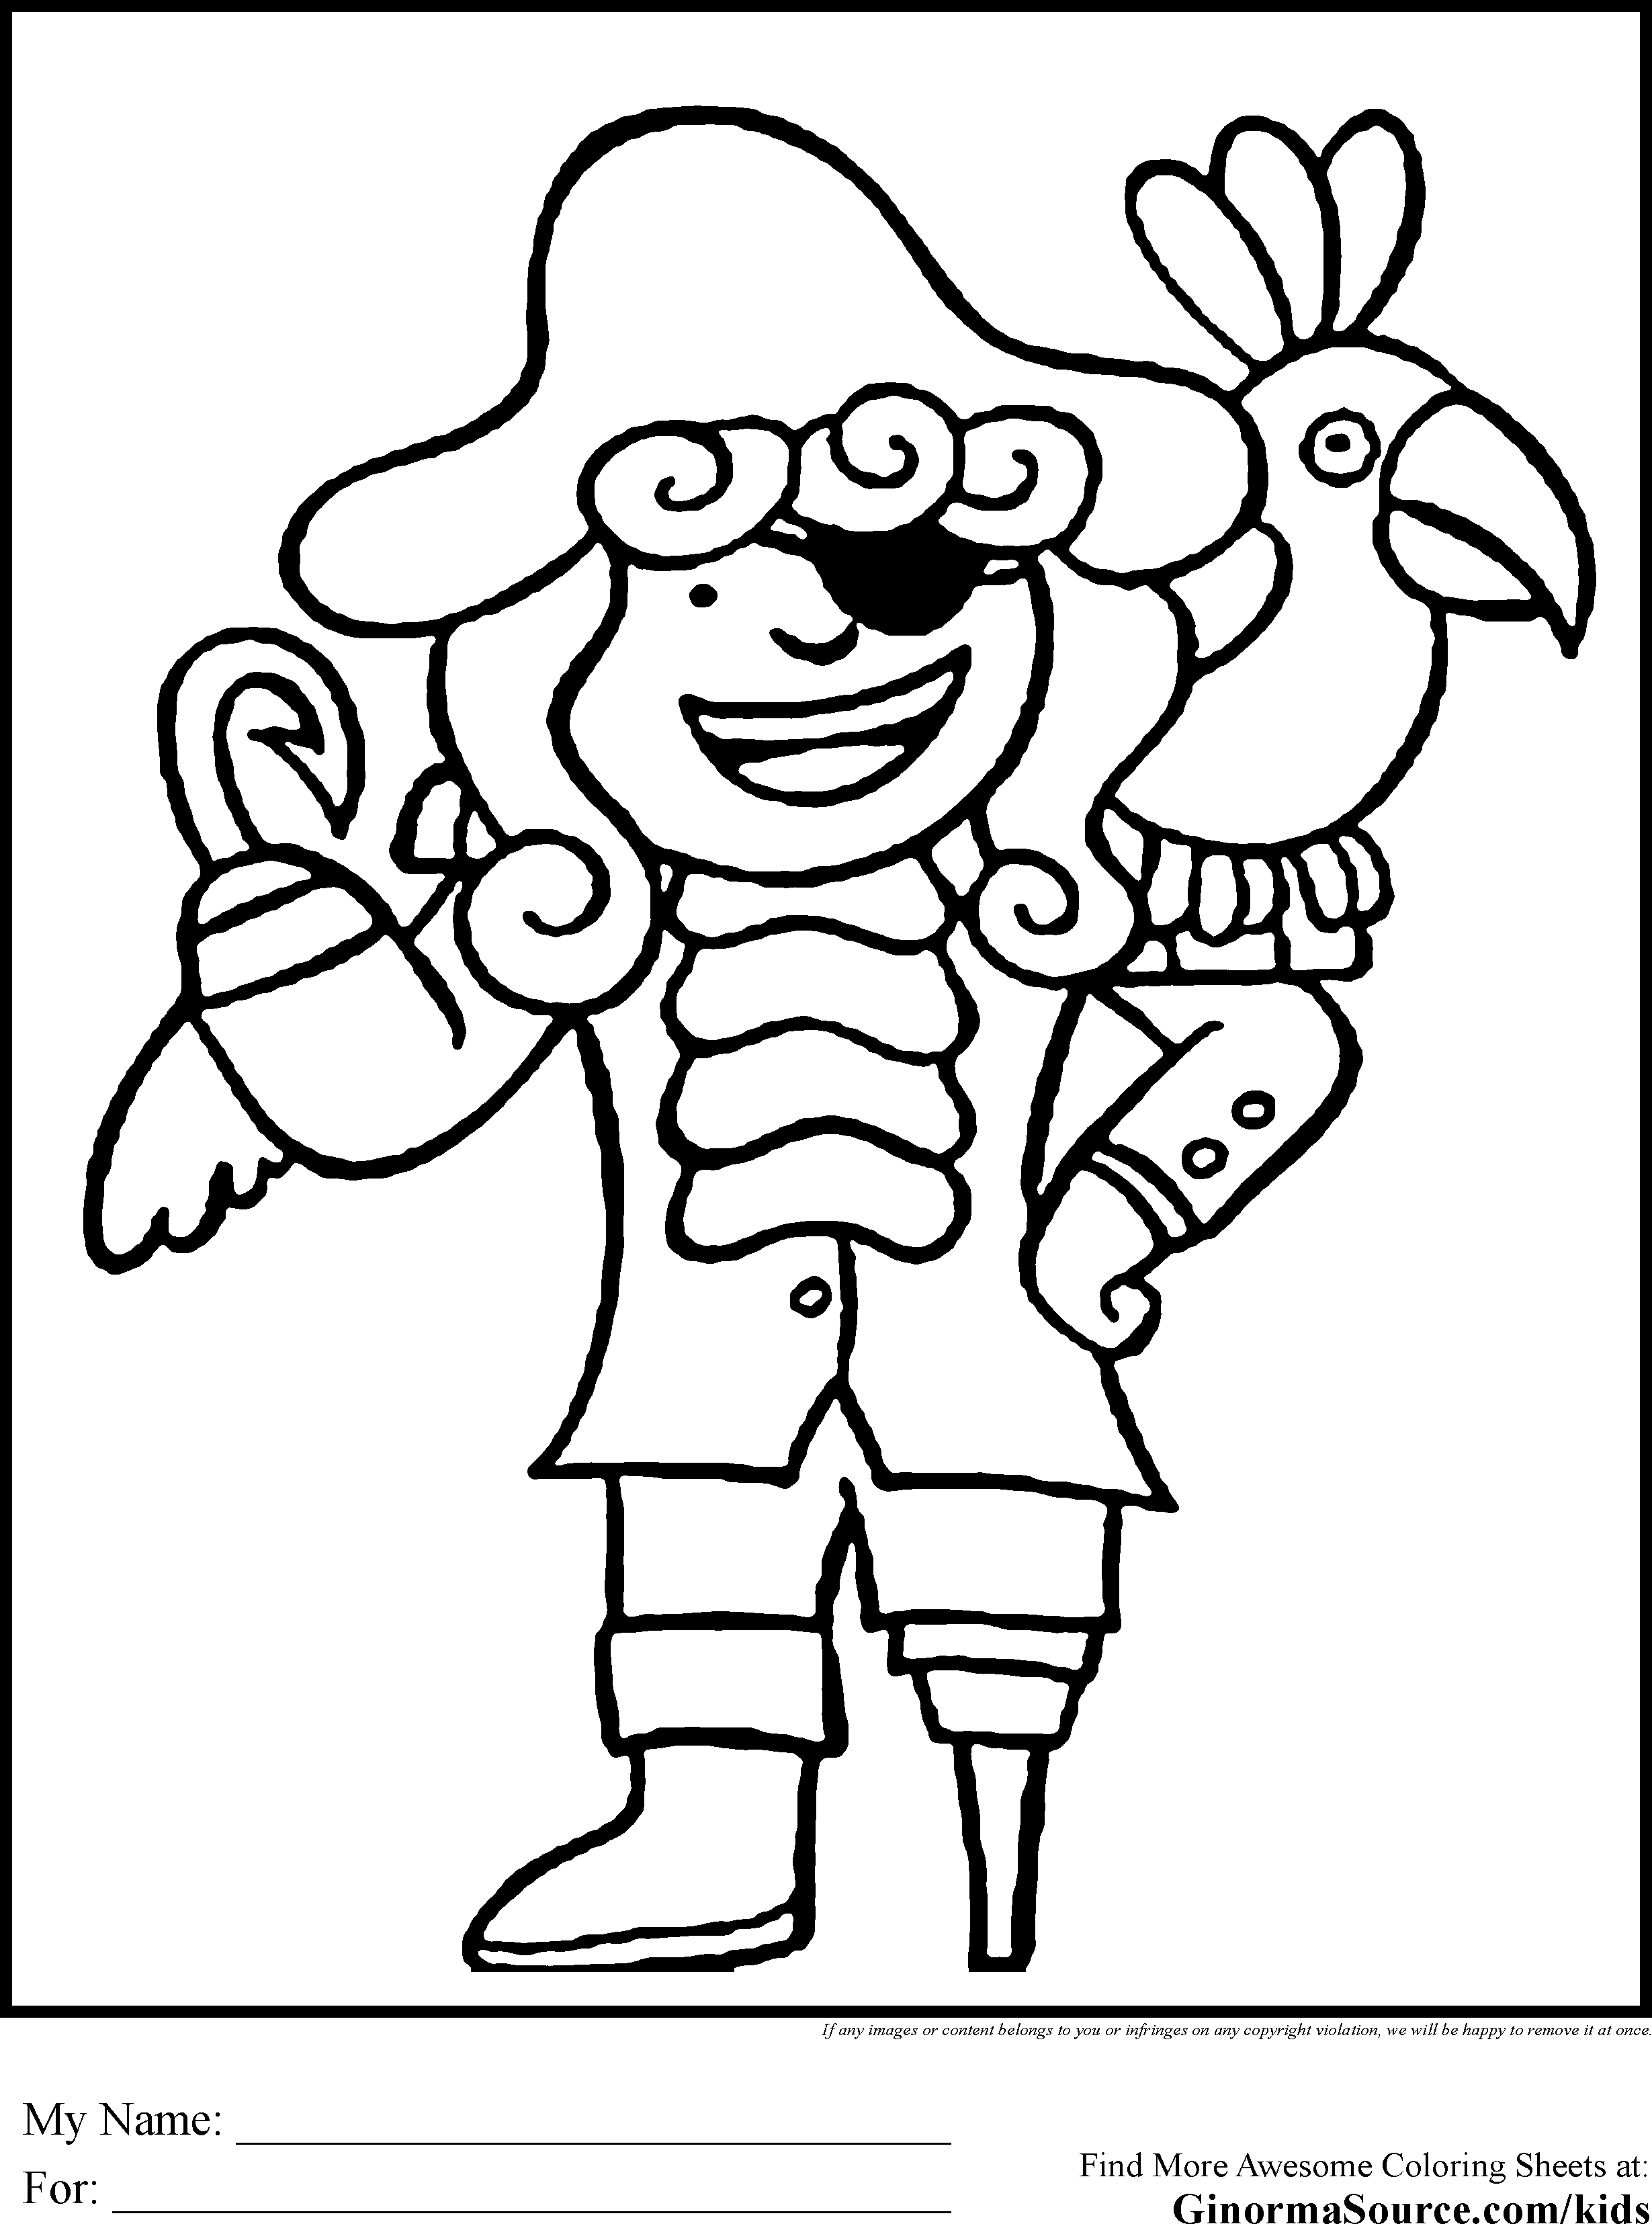 pirate coloring pages for kids pirate coloring pages to download and print for free coloring for kids pirate pages 